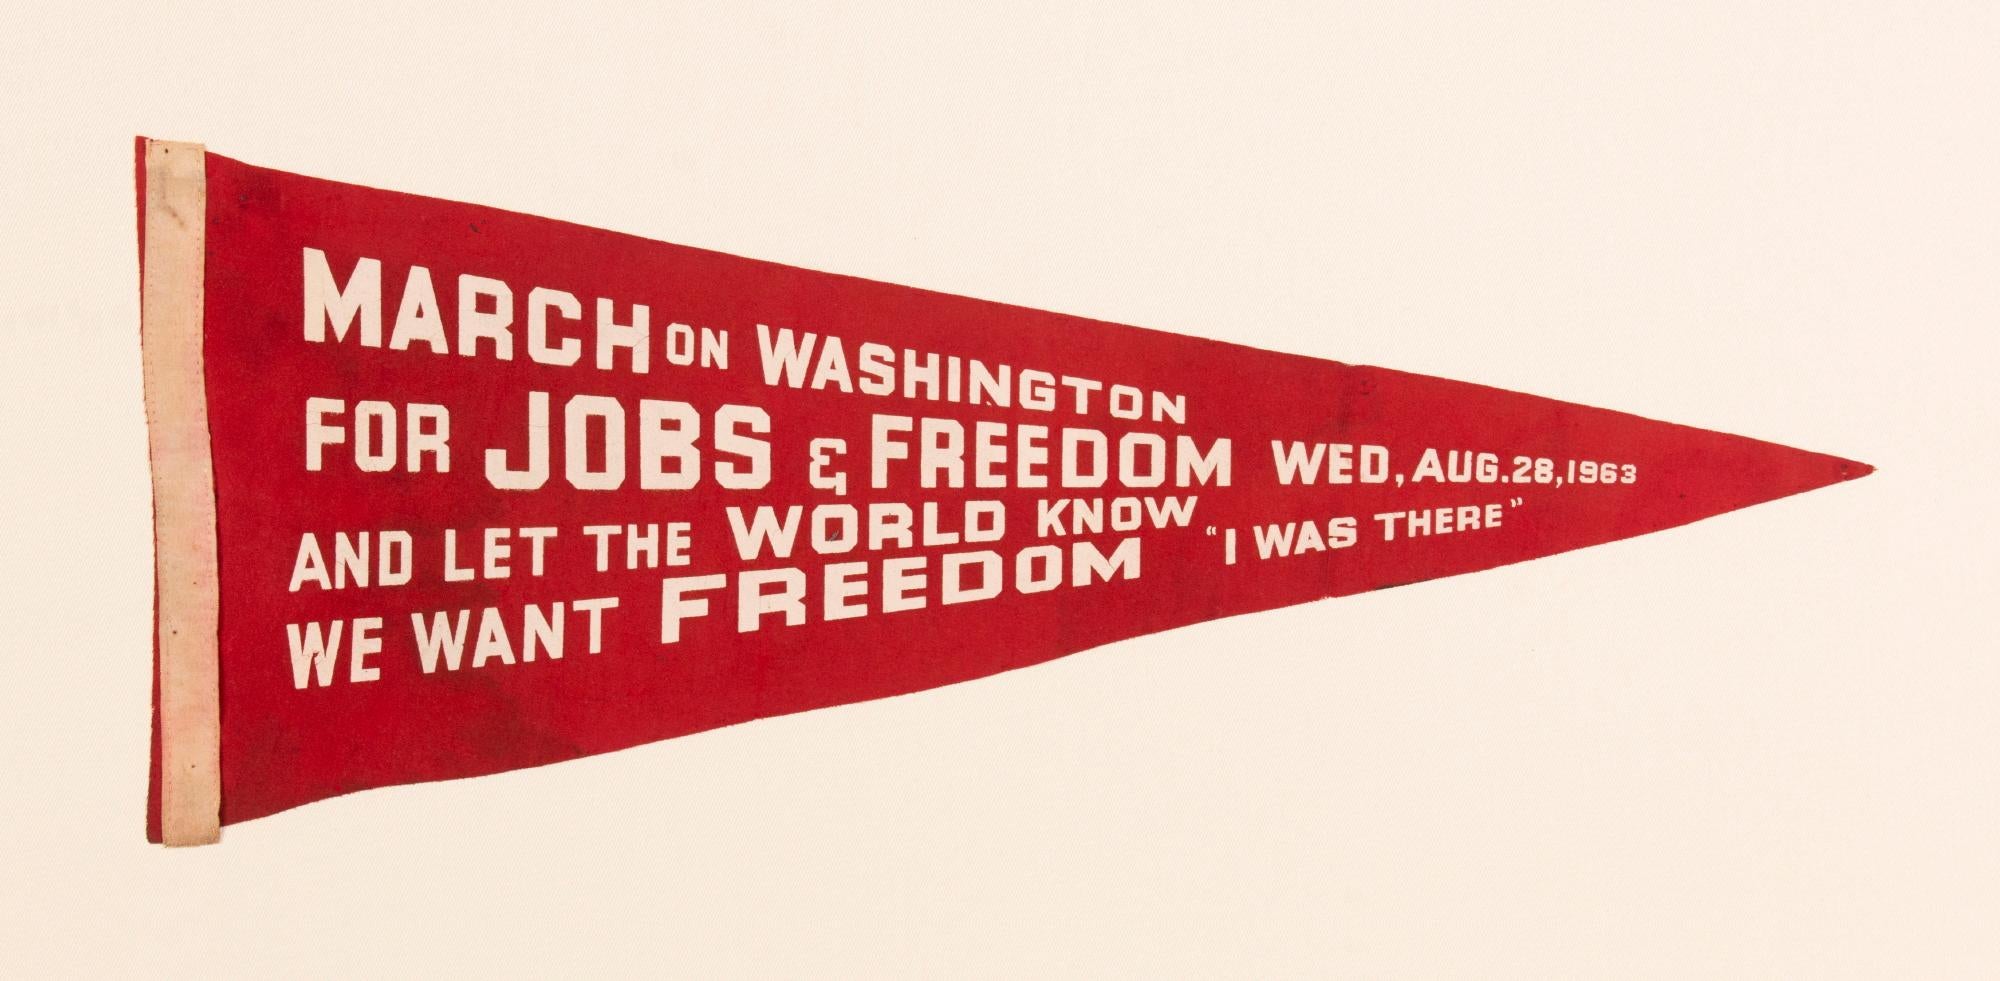 RARE FELT PENNANT FROM THE MARCH ON WASHINGTON, AUGUST 28, 1963, WHEN MARTIN LUTHER KING DELIVERED HIS HISTORIC 